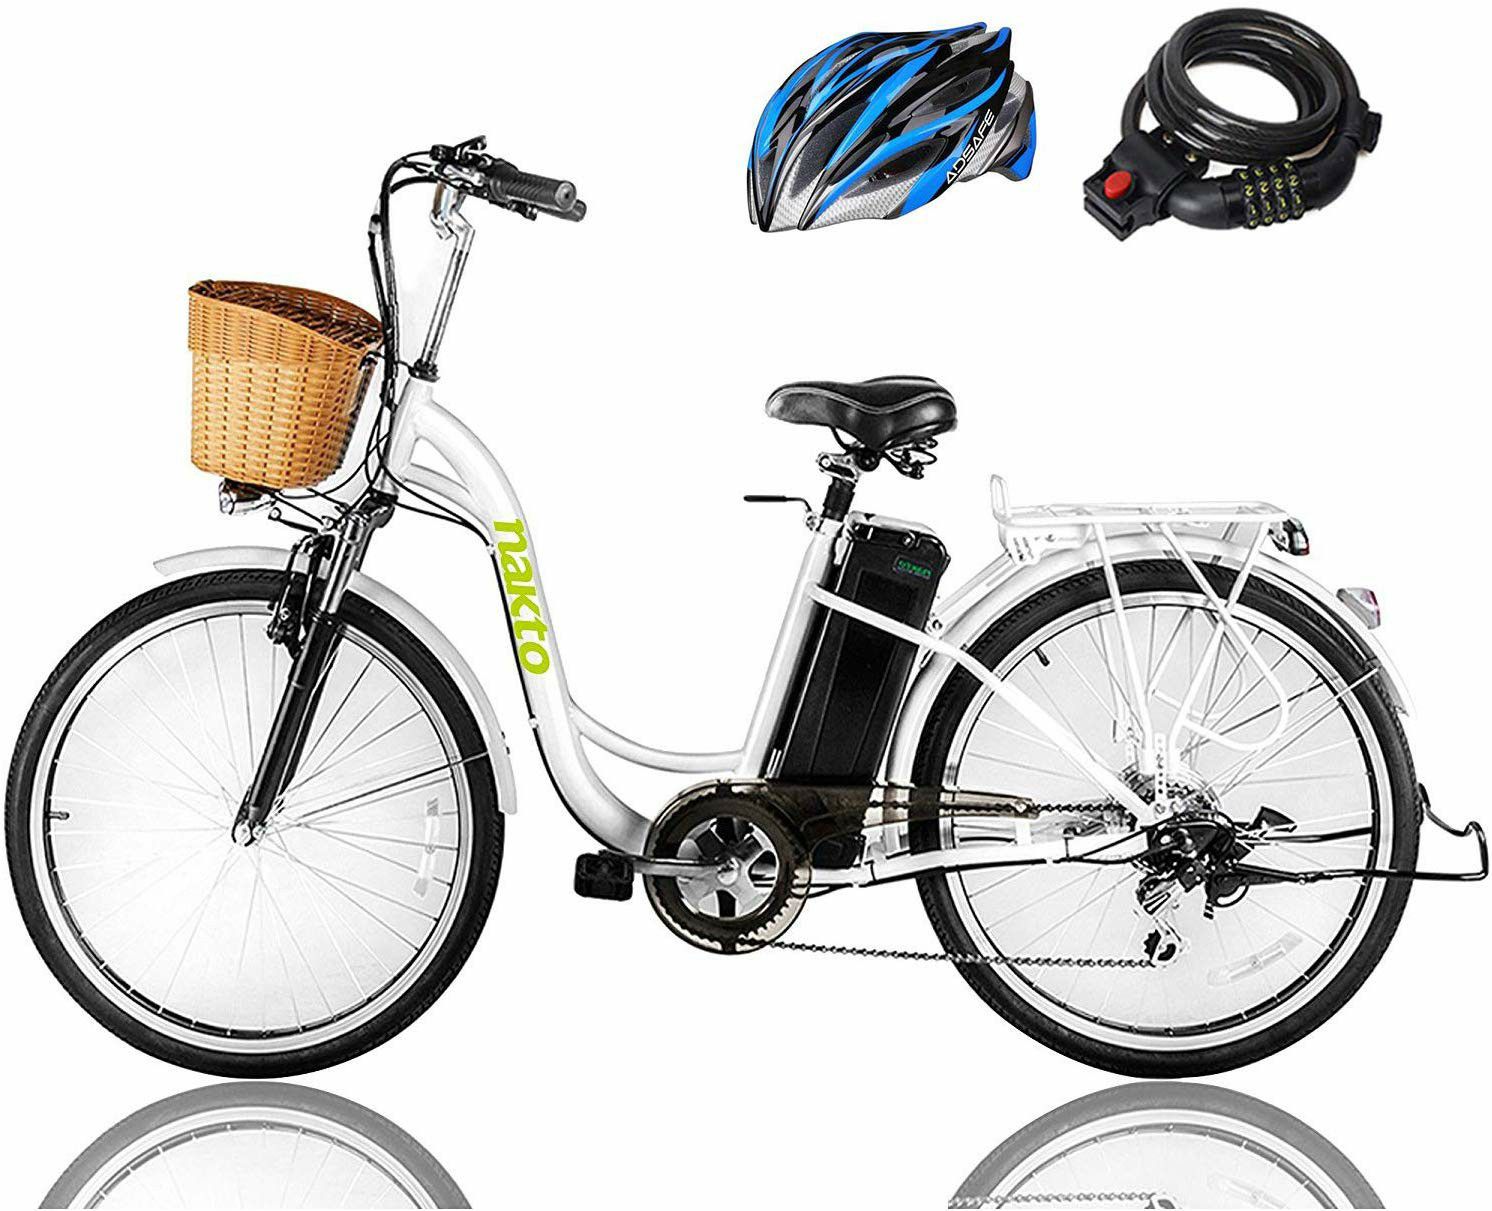 Electric bicycle almost new